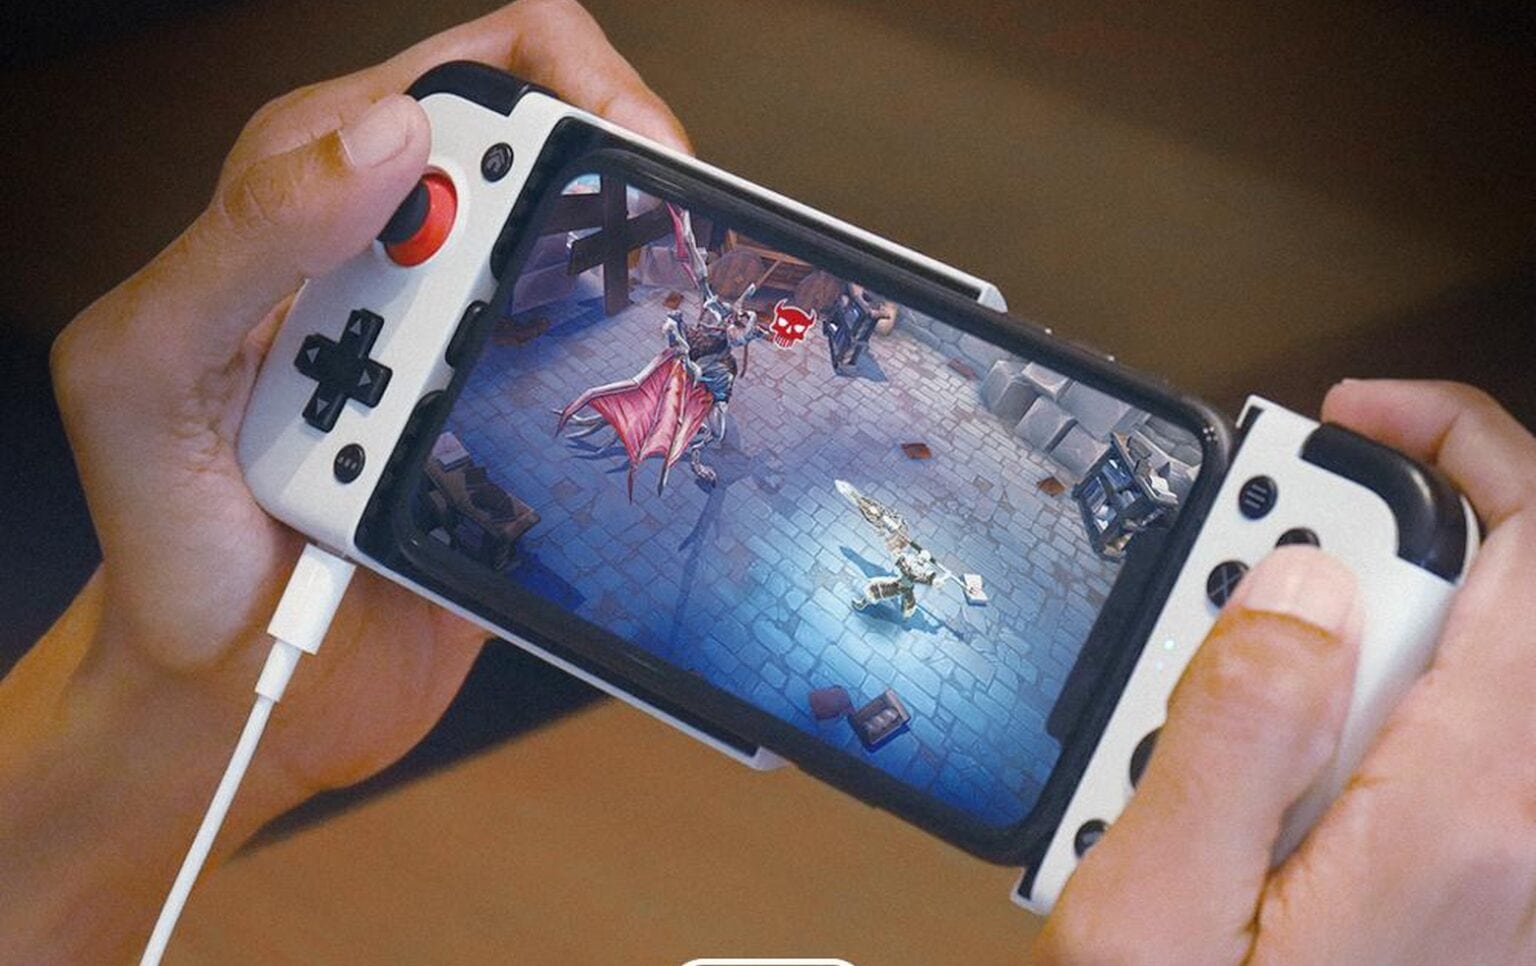 Make your iPhone more fun with GameSir X2 side-by-side game controller with Lightning